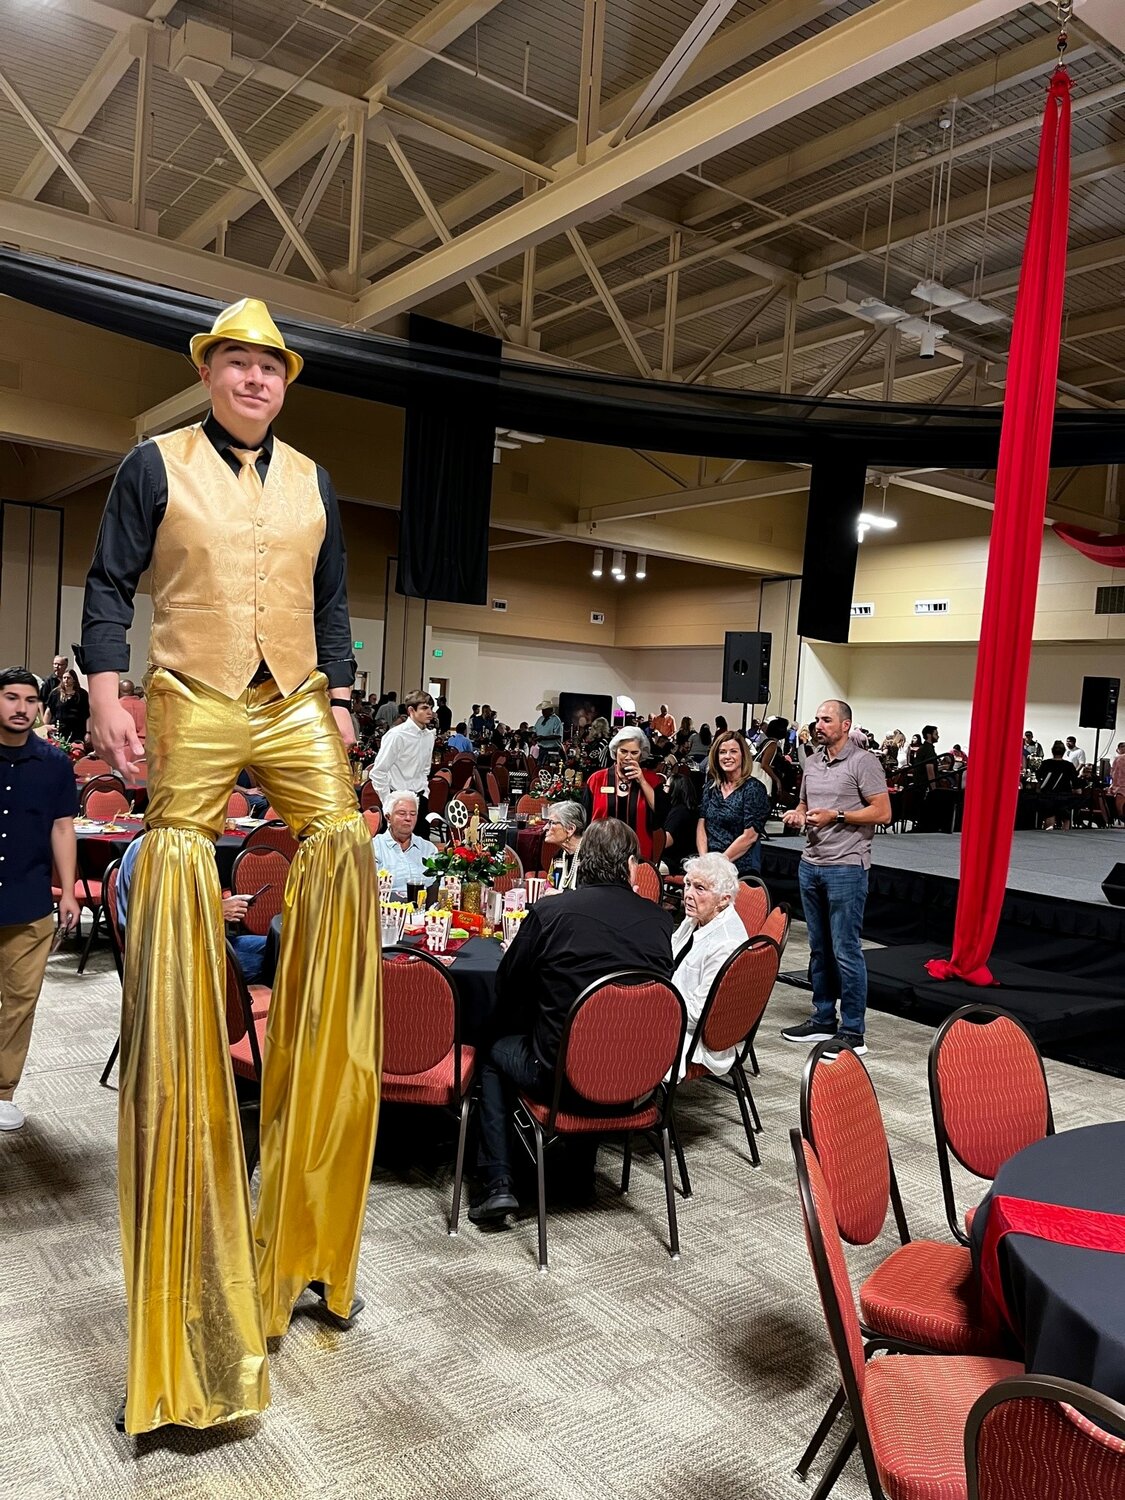 Guests at the Aug. 12 Men Who Cook fundraiser for Mesilla Valley Hospice were treated to all kinds of entertainment at the event, including stilt walkers.